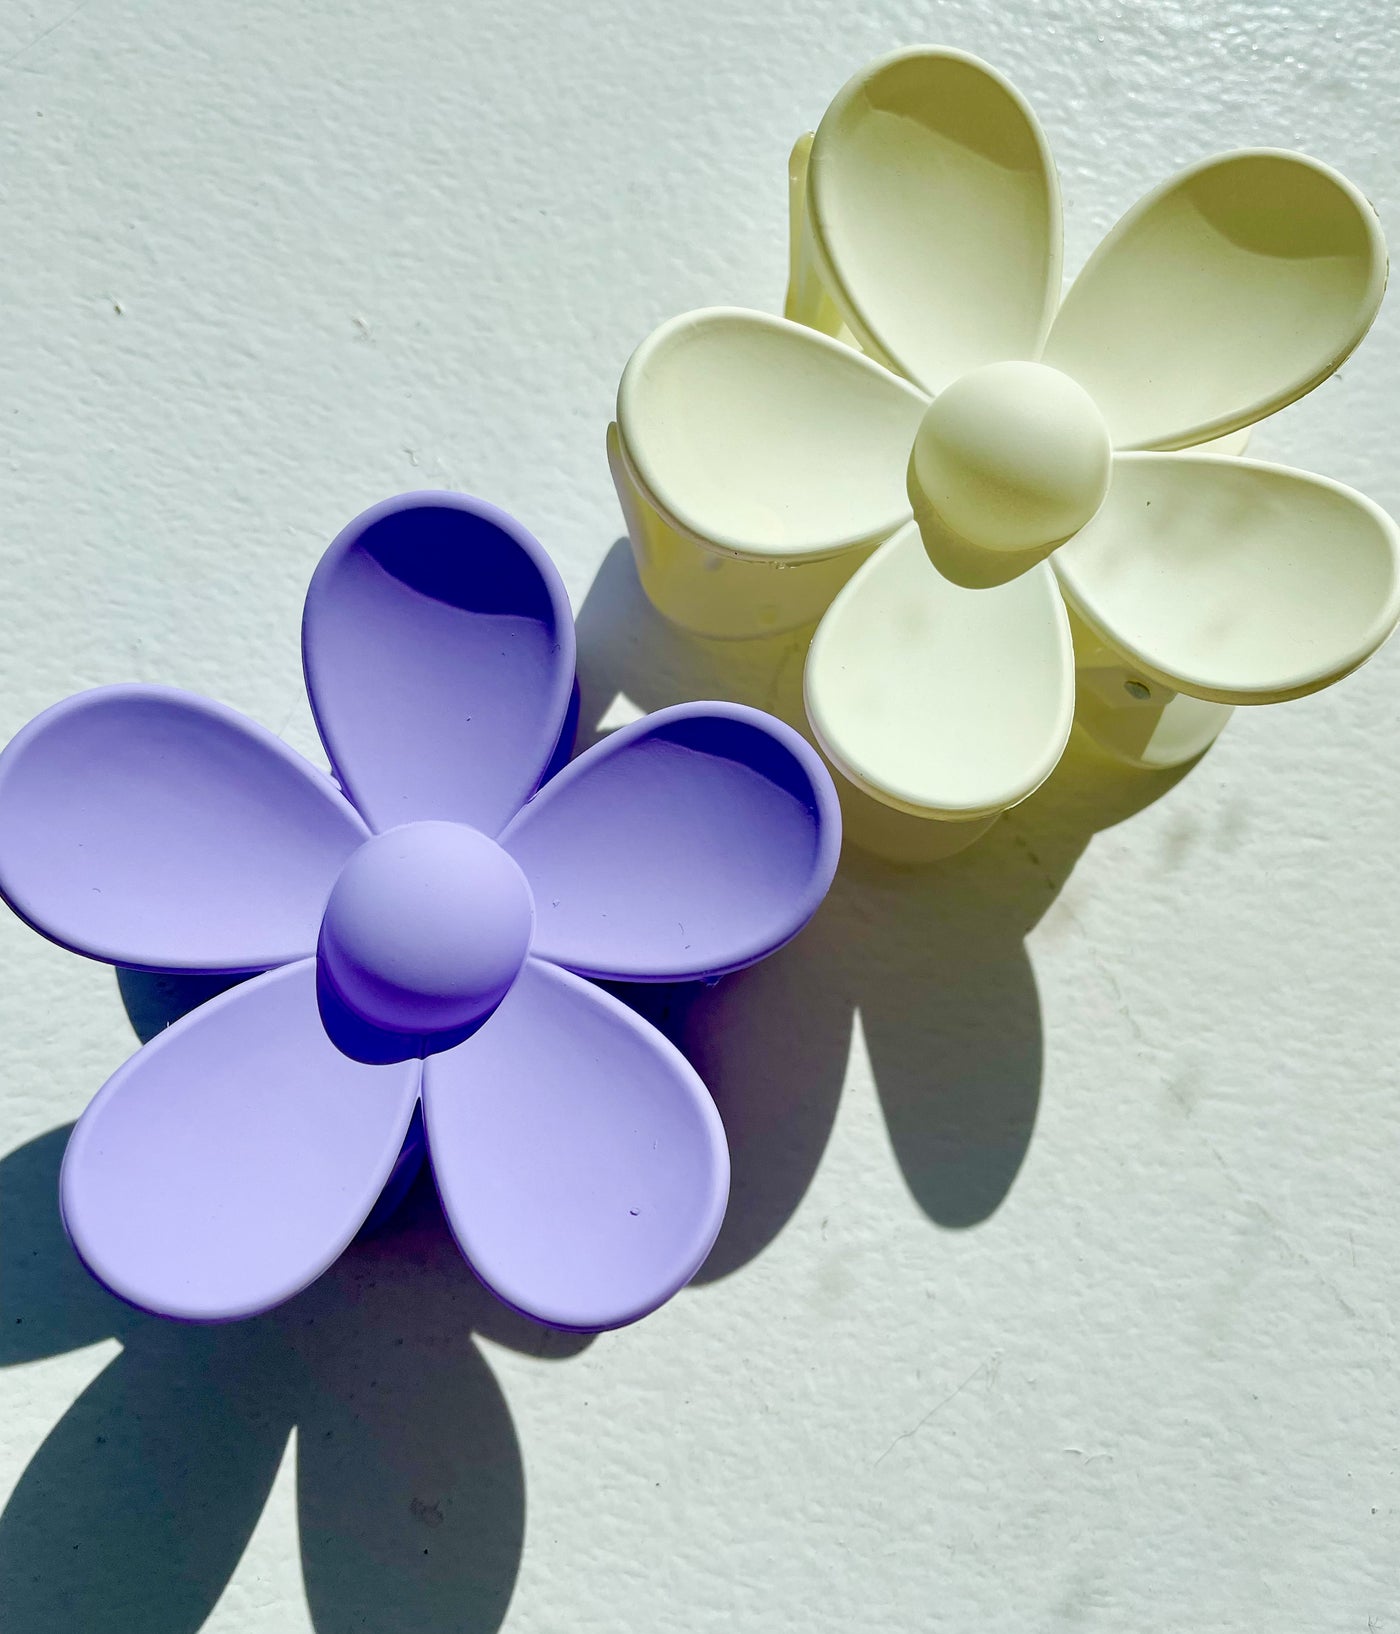 Large 3 inch powder coated flower shaped hair clips in white and periwinkle/ purple.